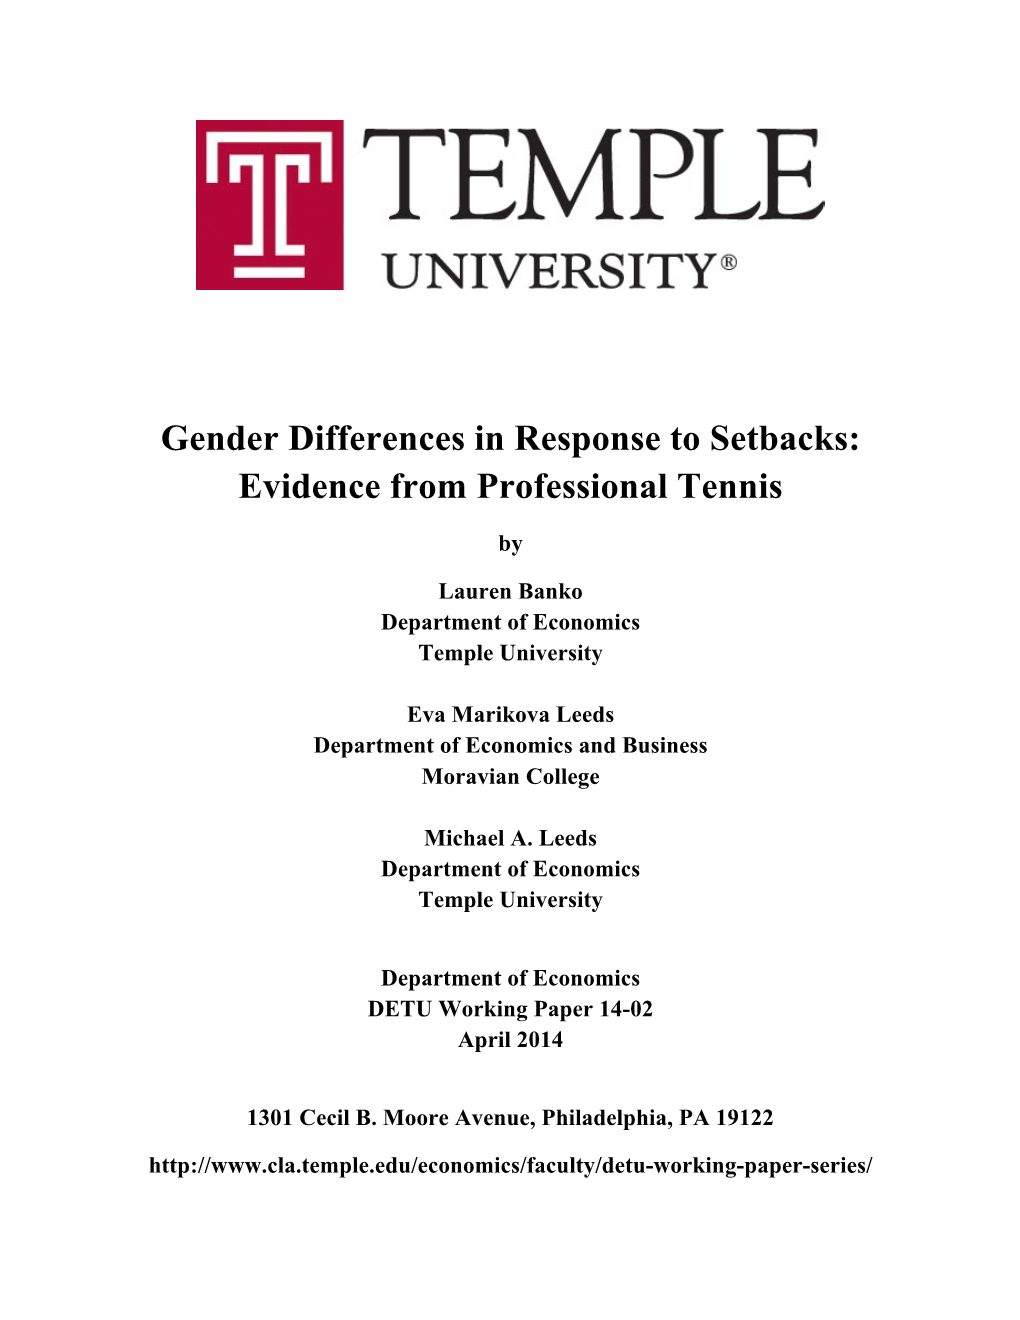 Gender Differences in Response to Setbacks: Evidence from Professional Tennis